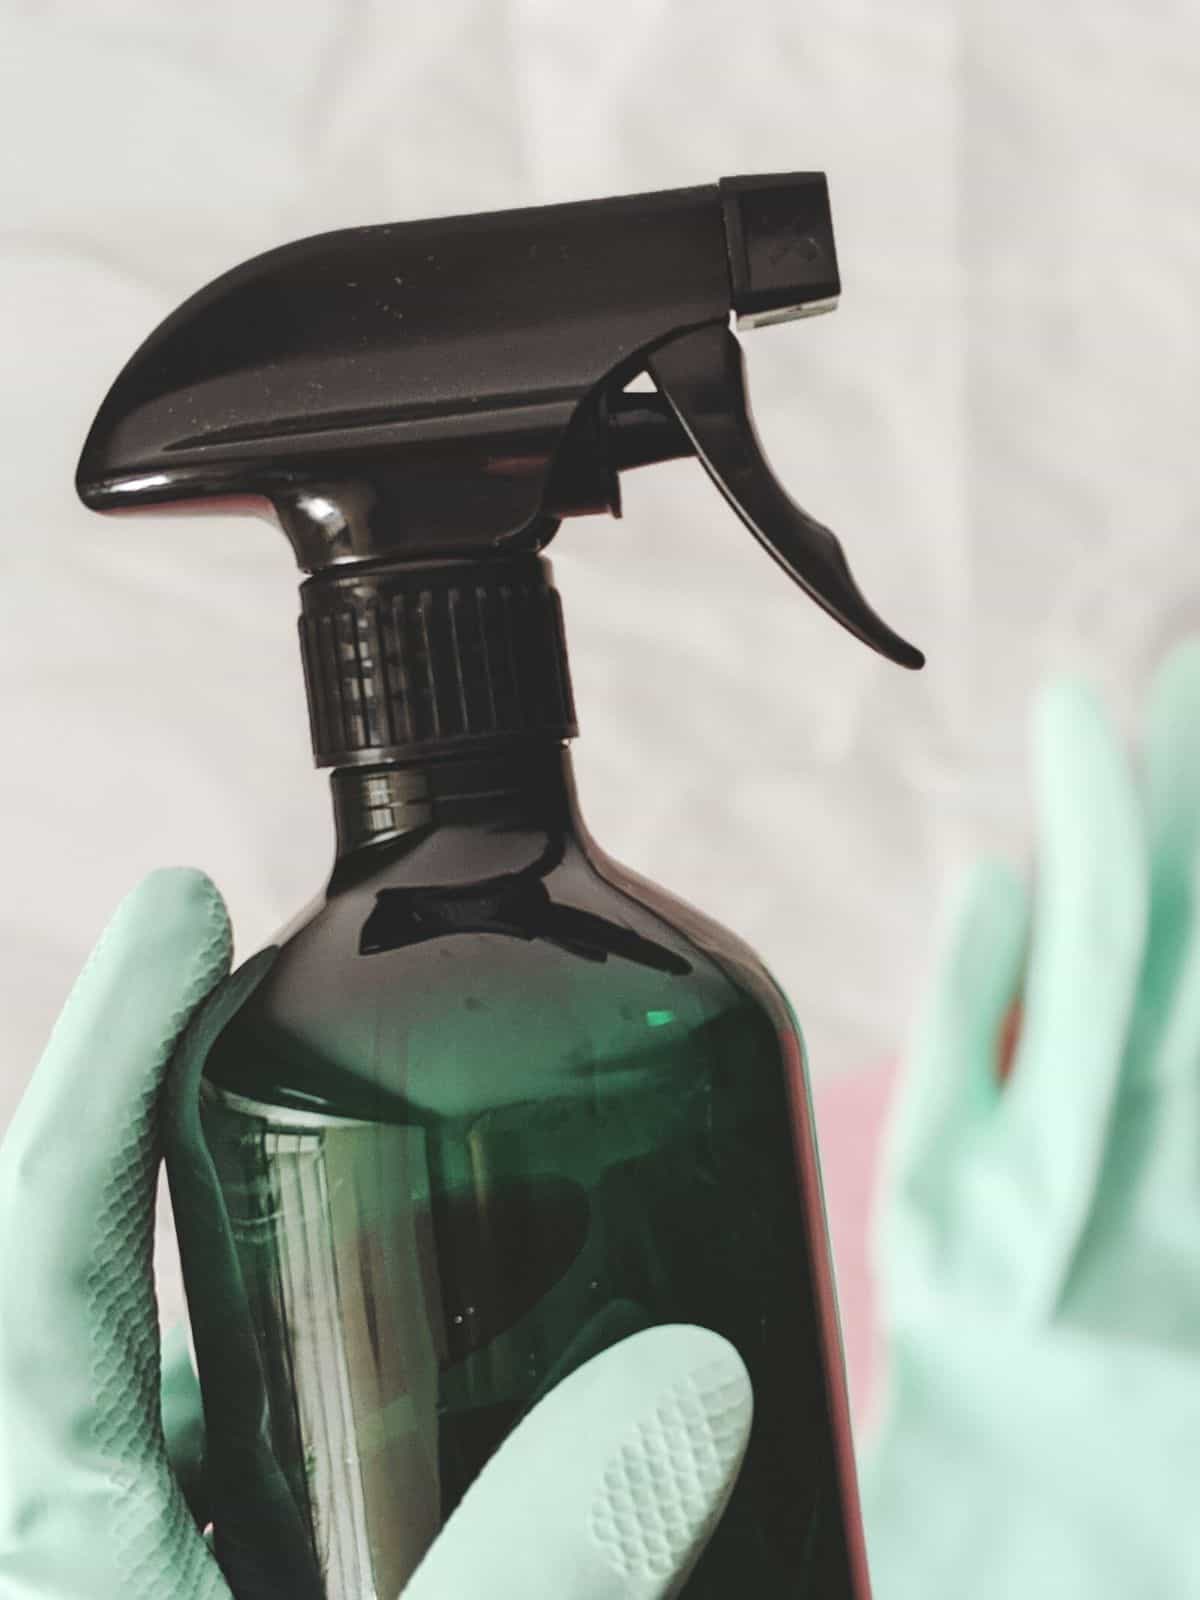 Hand with a green rubber glove on holding a glass spray bottle of natural homemade cleaner.